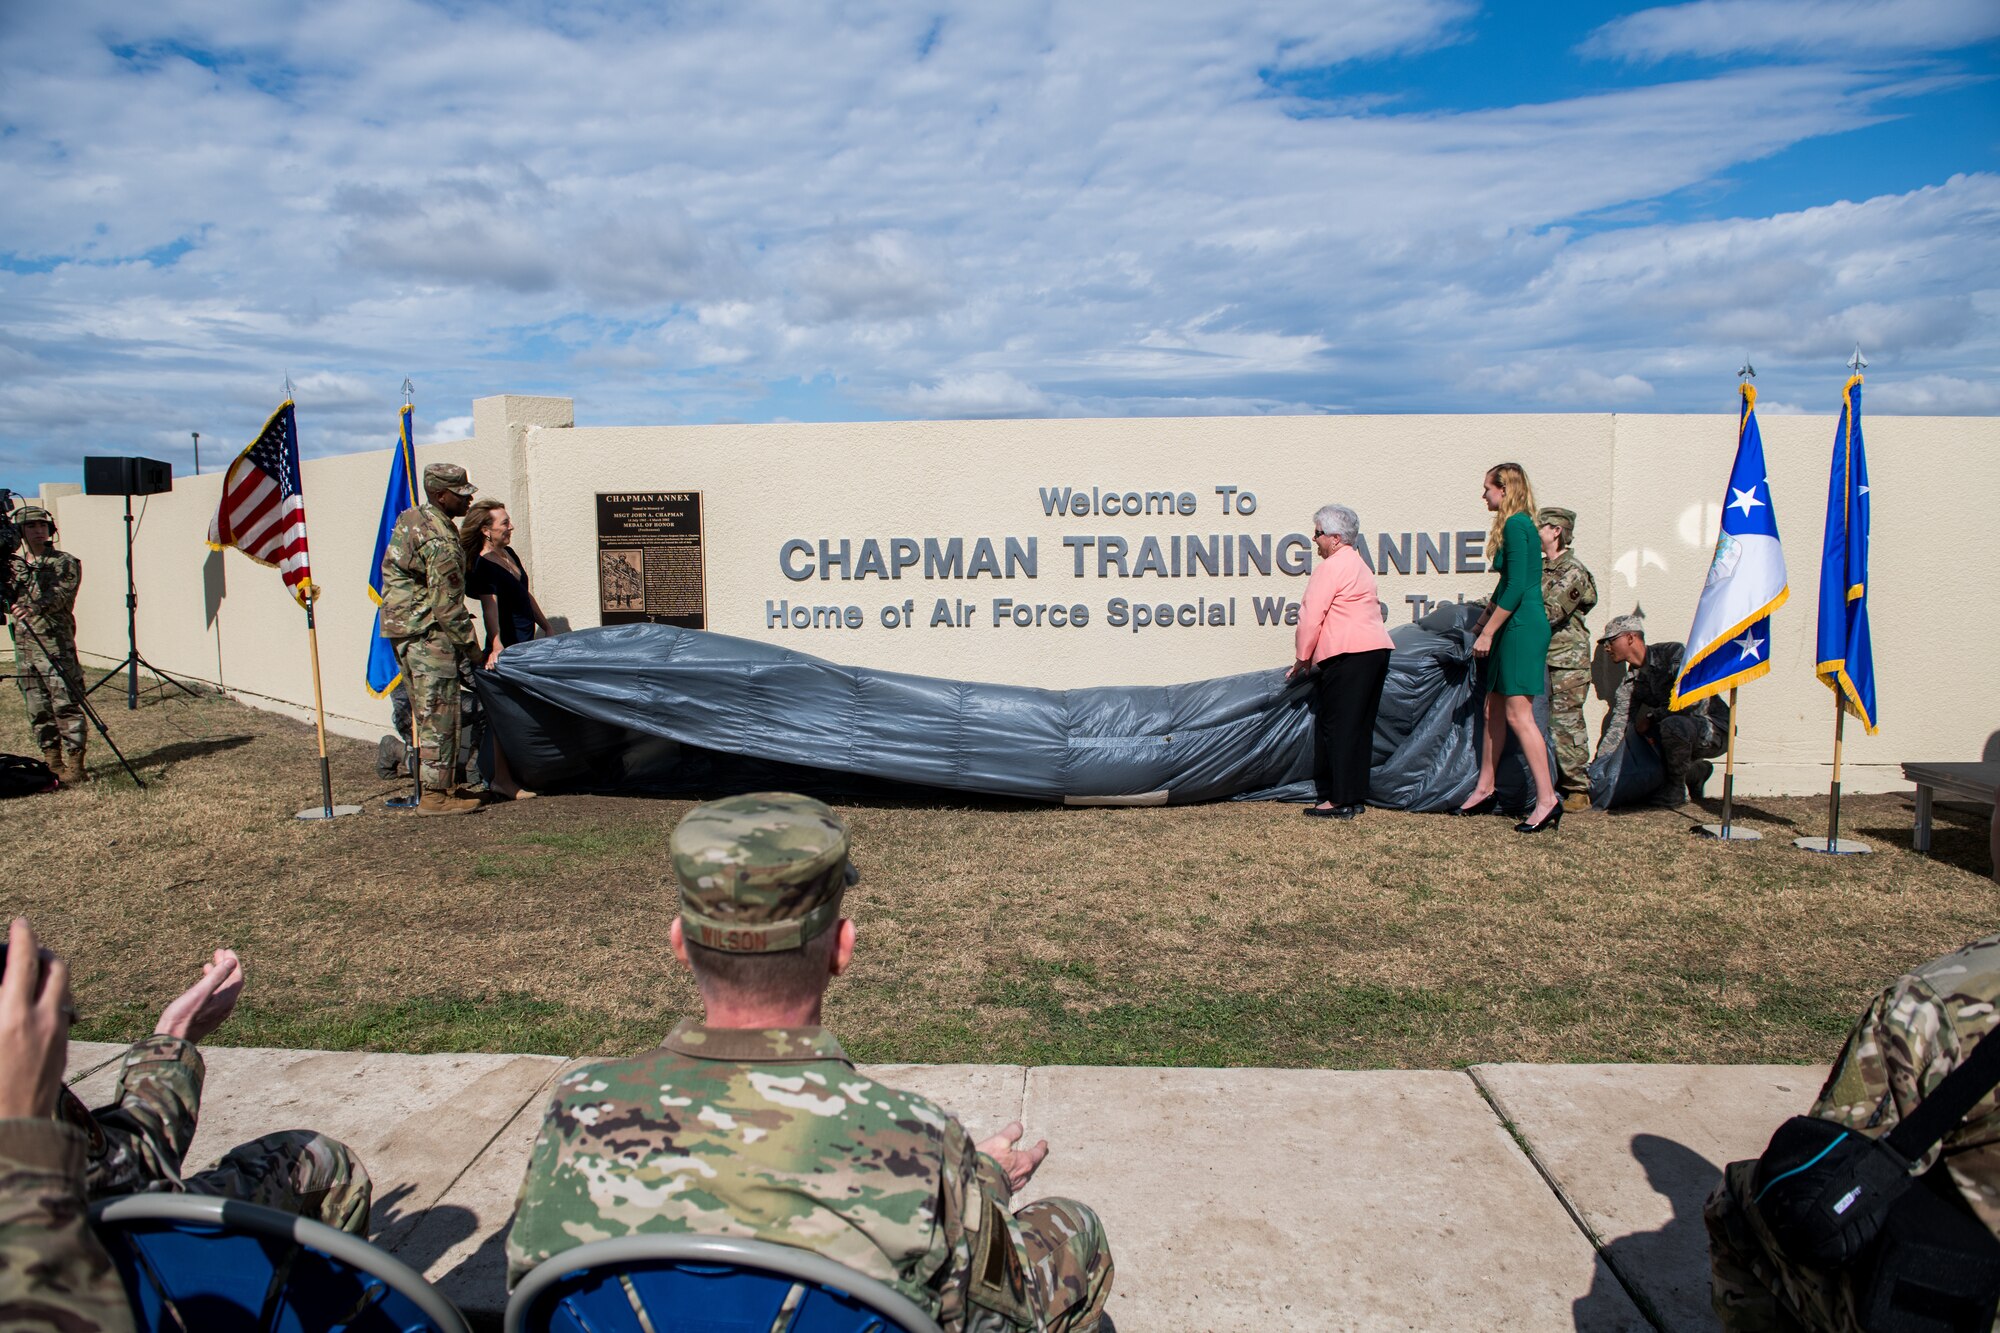 Chief Master Sgt. of the Air Force Kaleth O. Wright (left) and Chief Master Sgt. Julie Gudgel (right), along with the family of Master Sgt. John A. Chapman (center), reveal the new sign during the Joint Base San Antonio Annex renaming ceremony, March 4, 2020, at Joint Base San Antonio-Chapman Annex, Texas. Joint Base San Antonio-Annex, home of Special Warfare training, is renamed JBSA-Chapman Annex in honor of the service, heroism, and ultimate sacrifice of Master Sgt. John A. Chapman. Chapman was posthumously awarded the Medal of Honor for his action in Takur Ghar, Afghanistan. (U.S. Air Force photo by Sarayuth Pinthong)